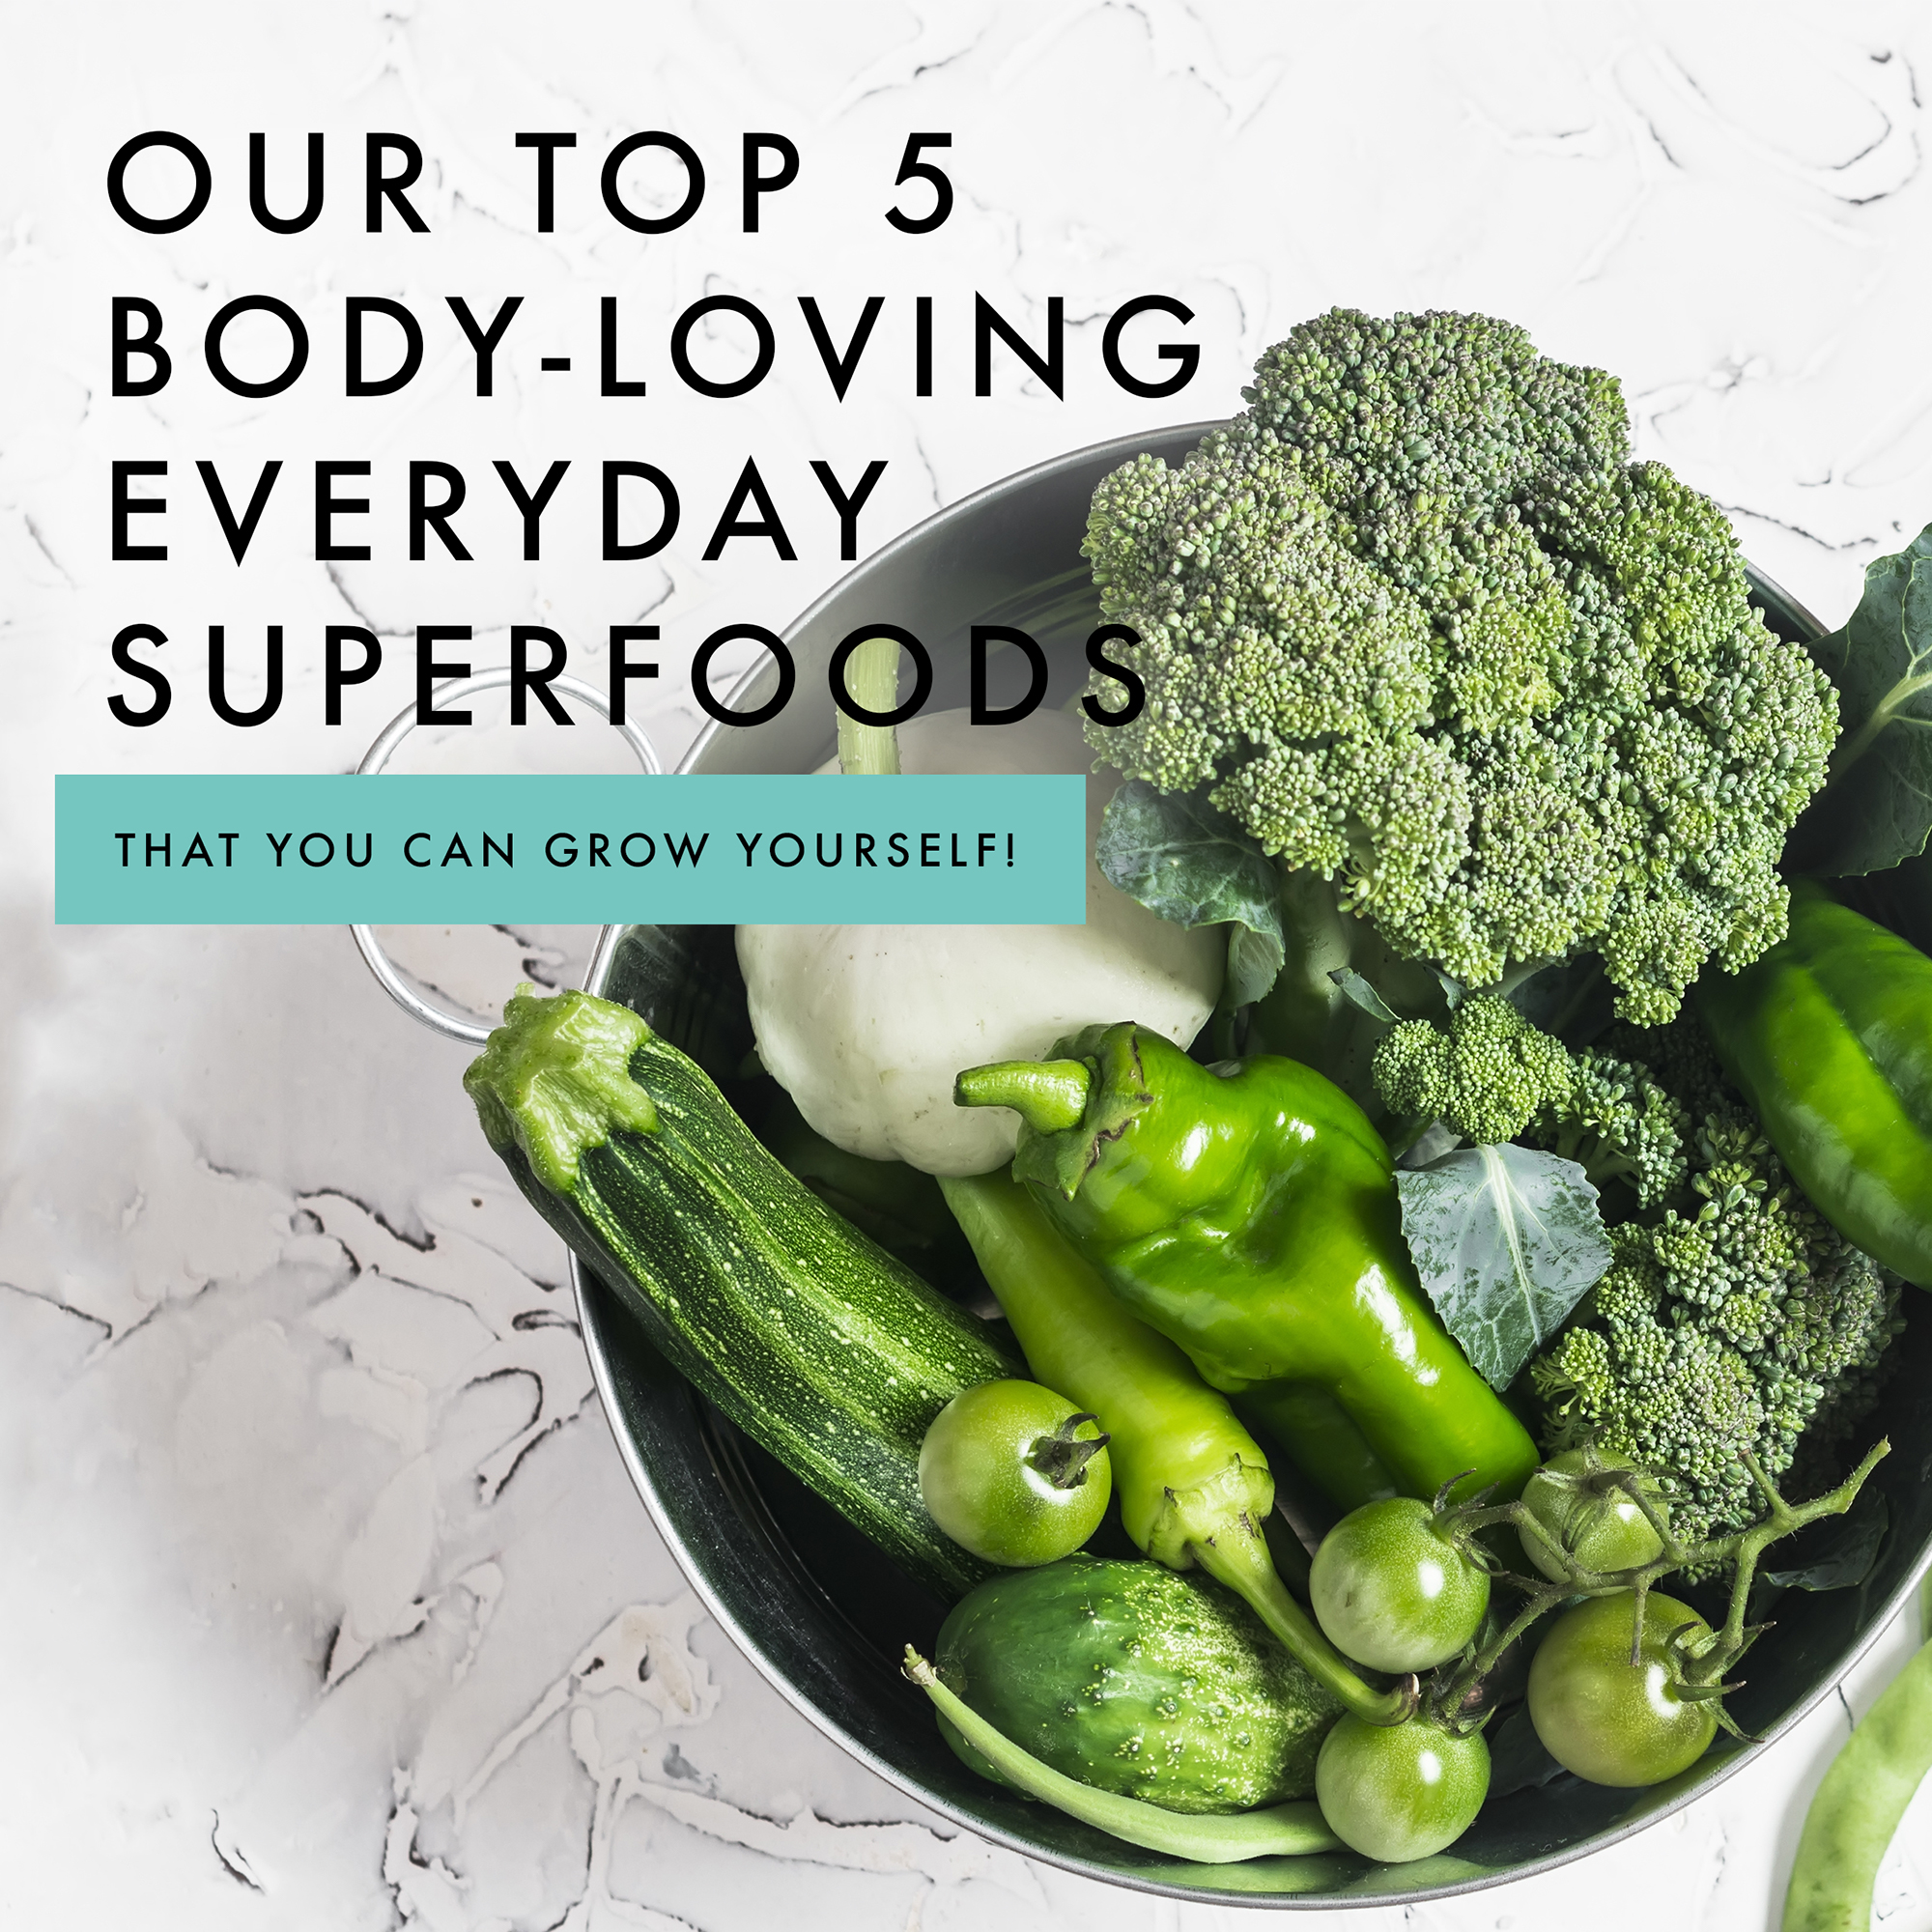 Our top 5 body-loving everyday superfoods that can grow yourself! - The Healthy Patch